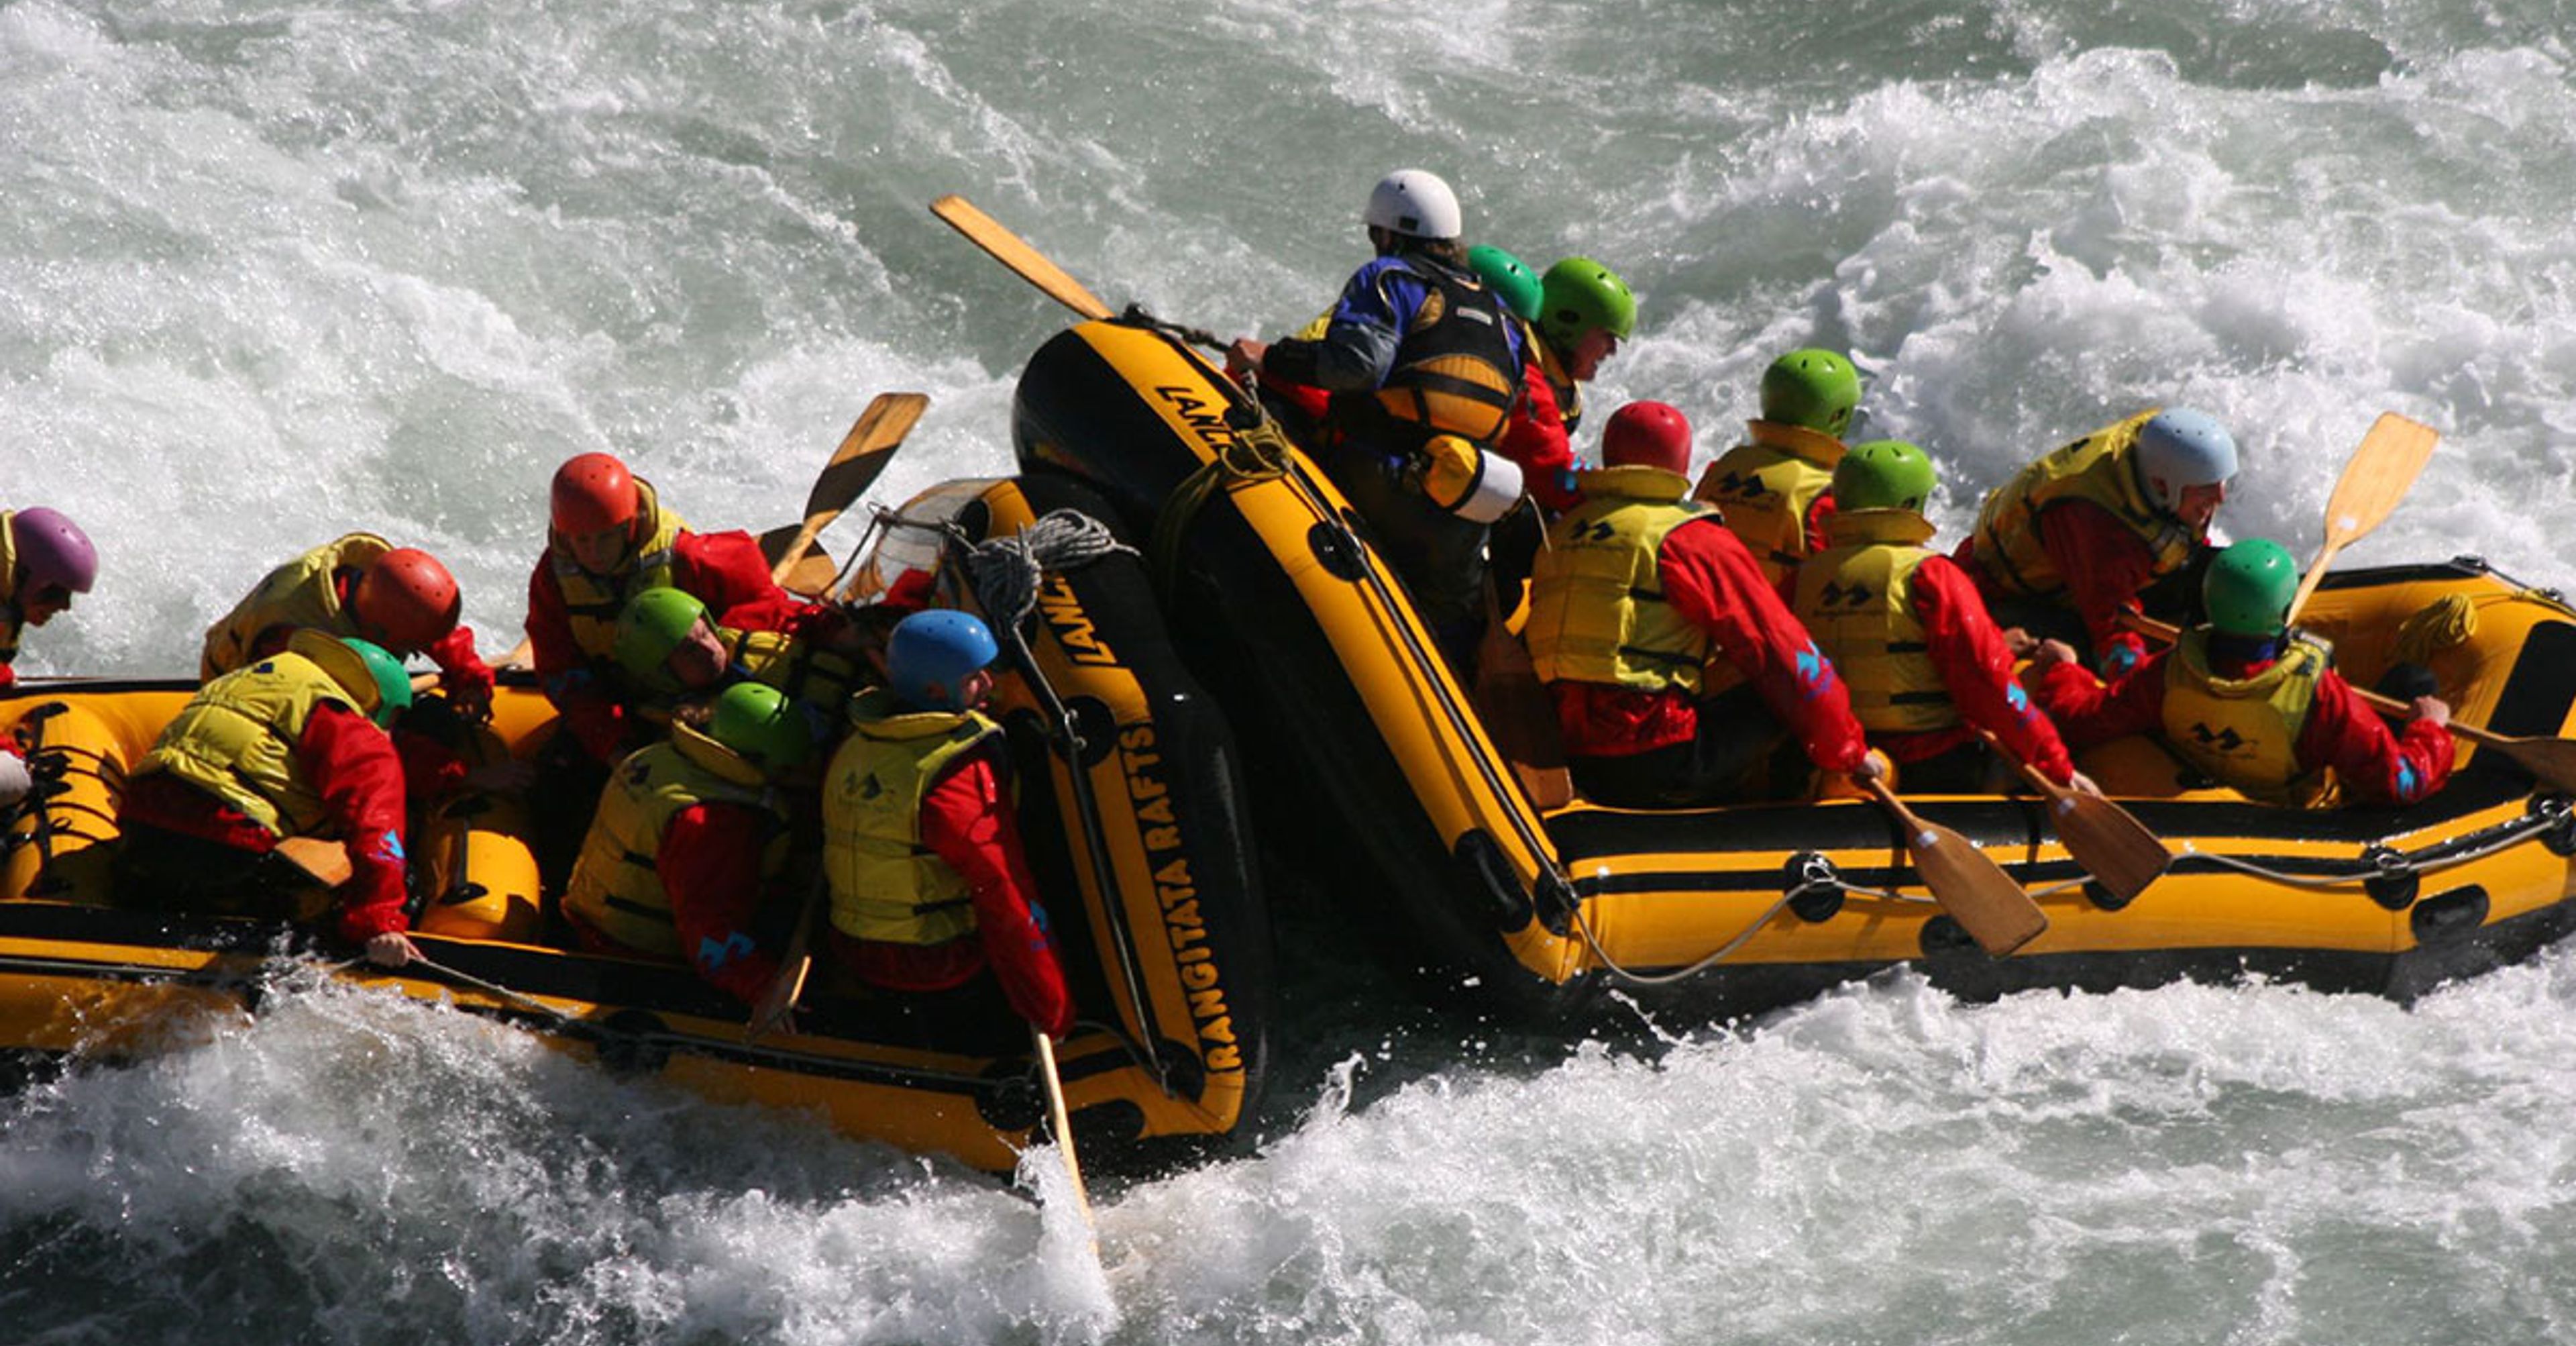 Friends River rafting Iceland in a crazy water